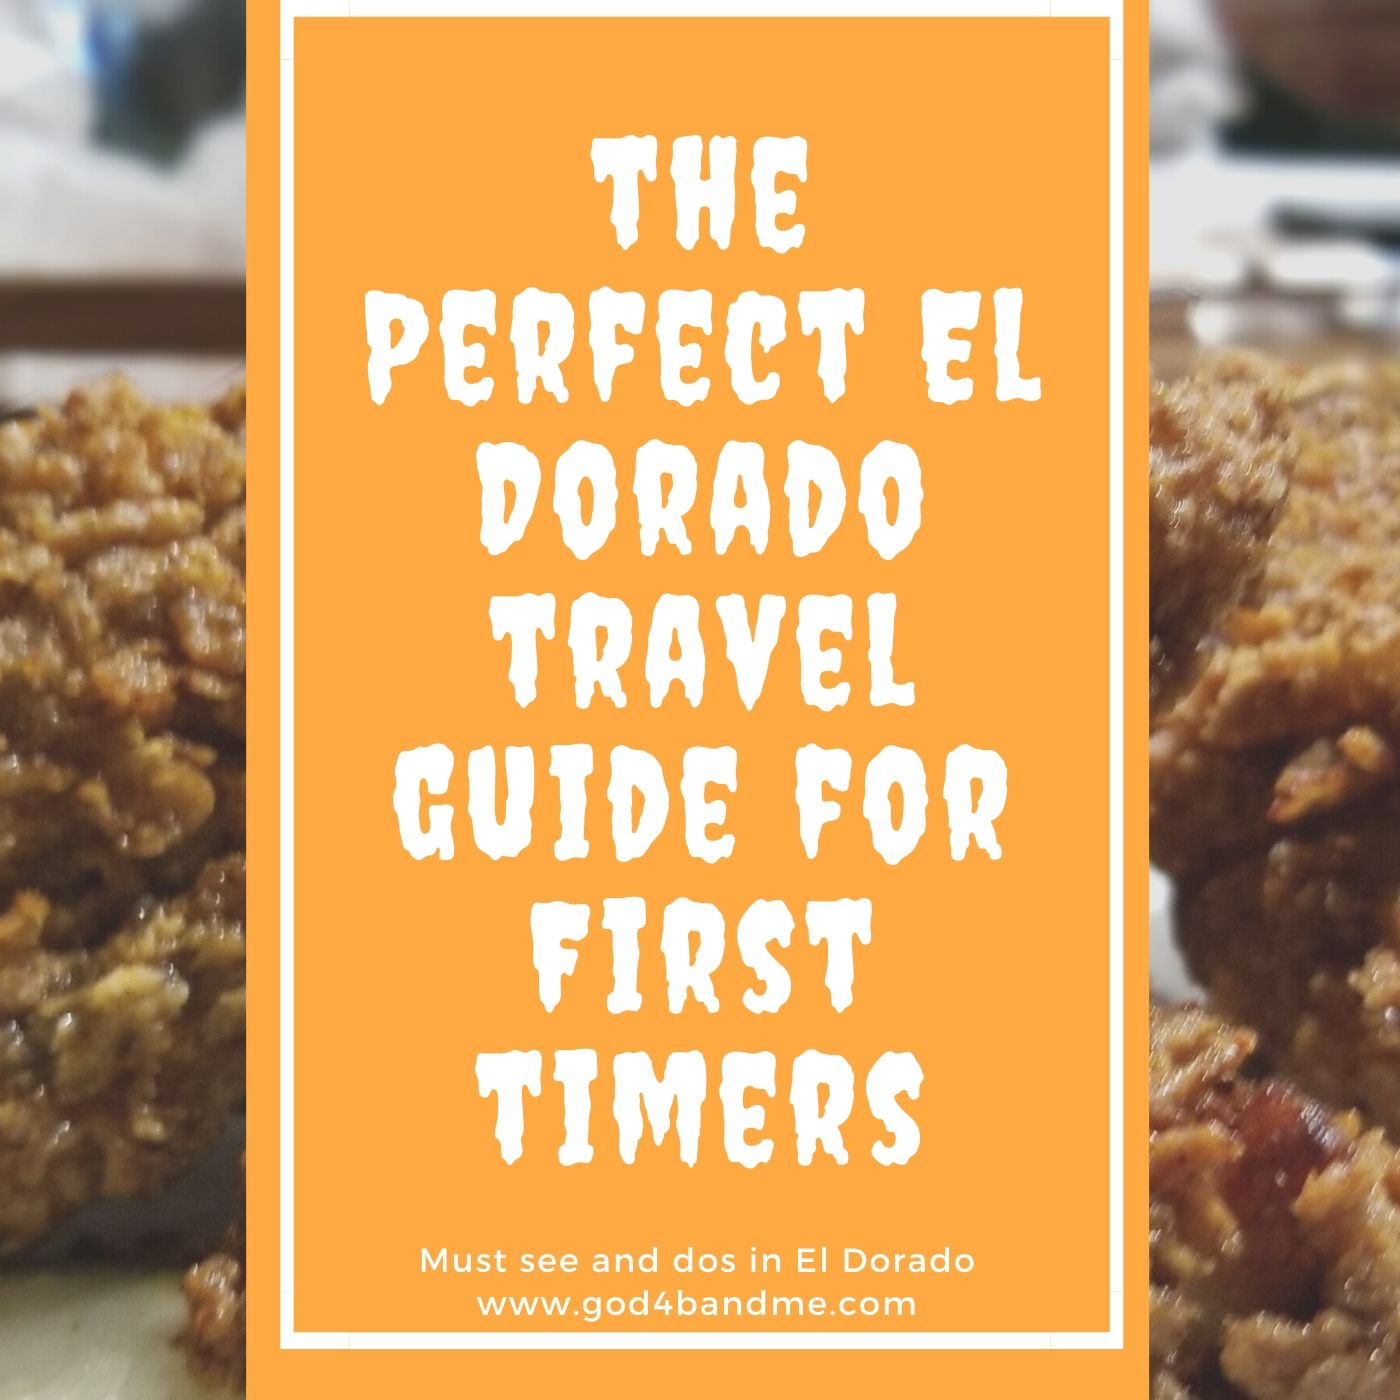 The Perfect El Dorado travel guide for first timers